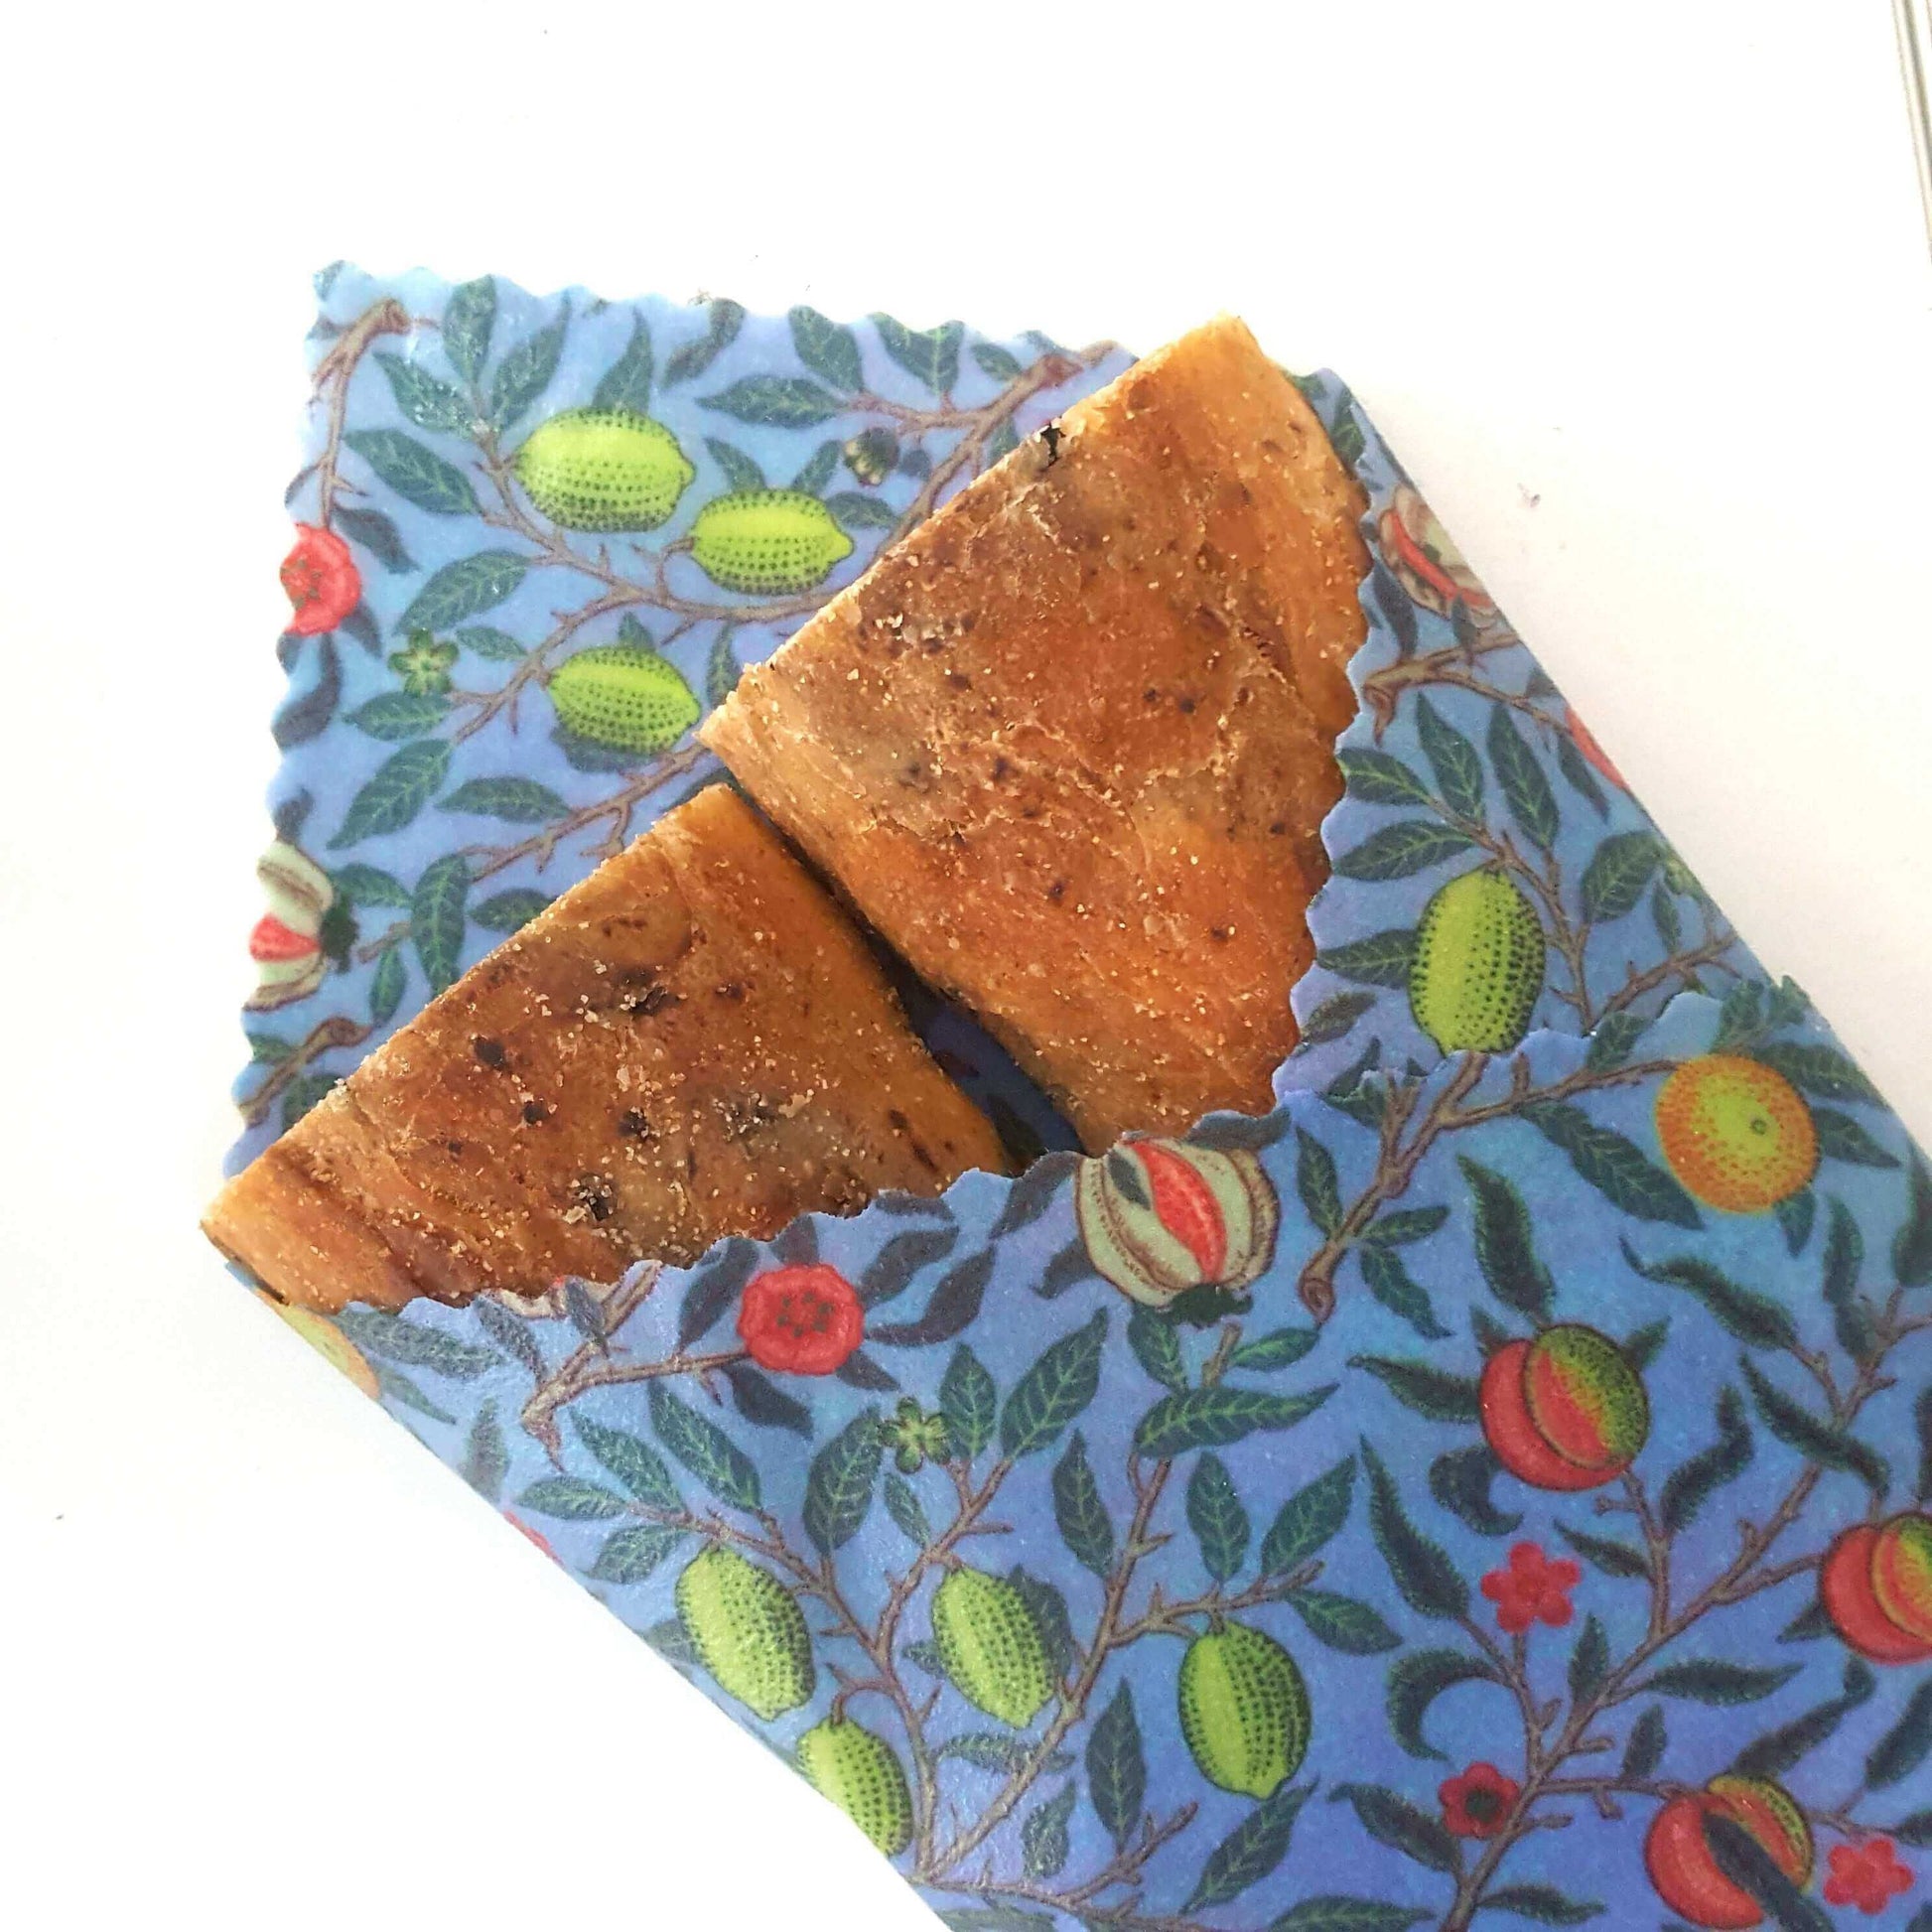 Reusable Beeswax Food Wraps 100% Hand Made in the UK by Honey Bee Good shown in William Morris Pomegranate sandwich